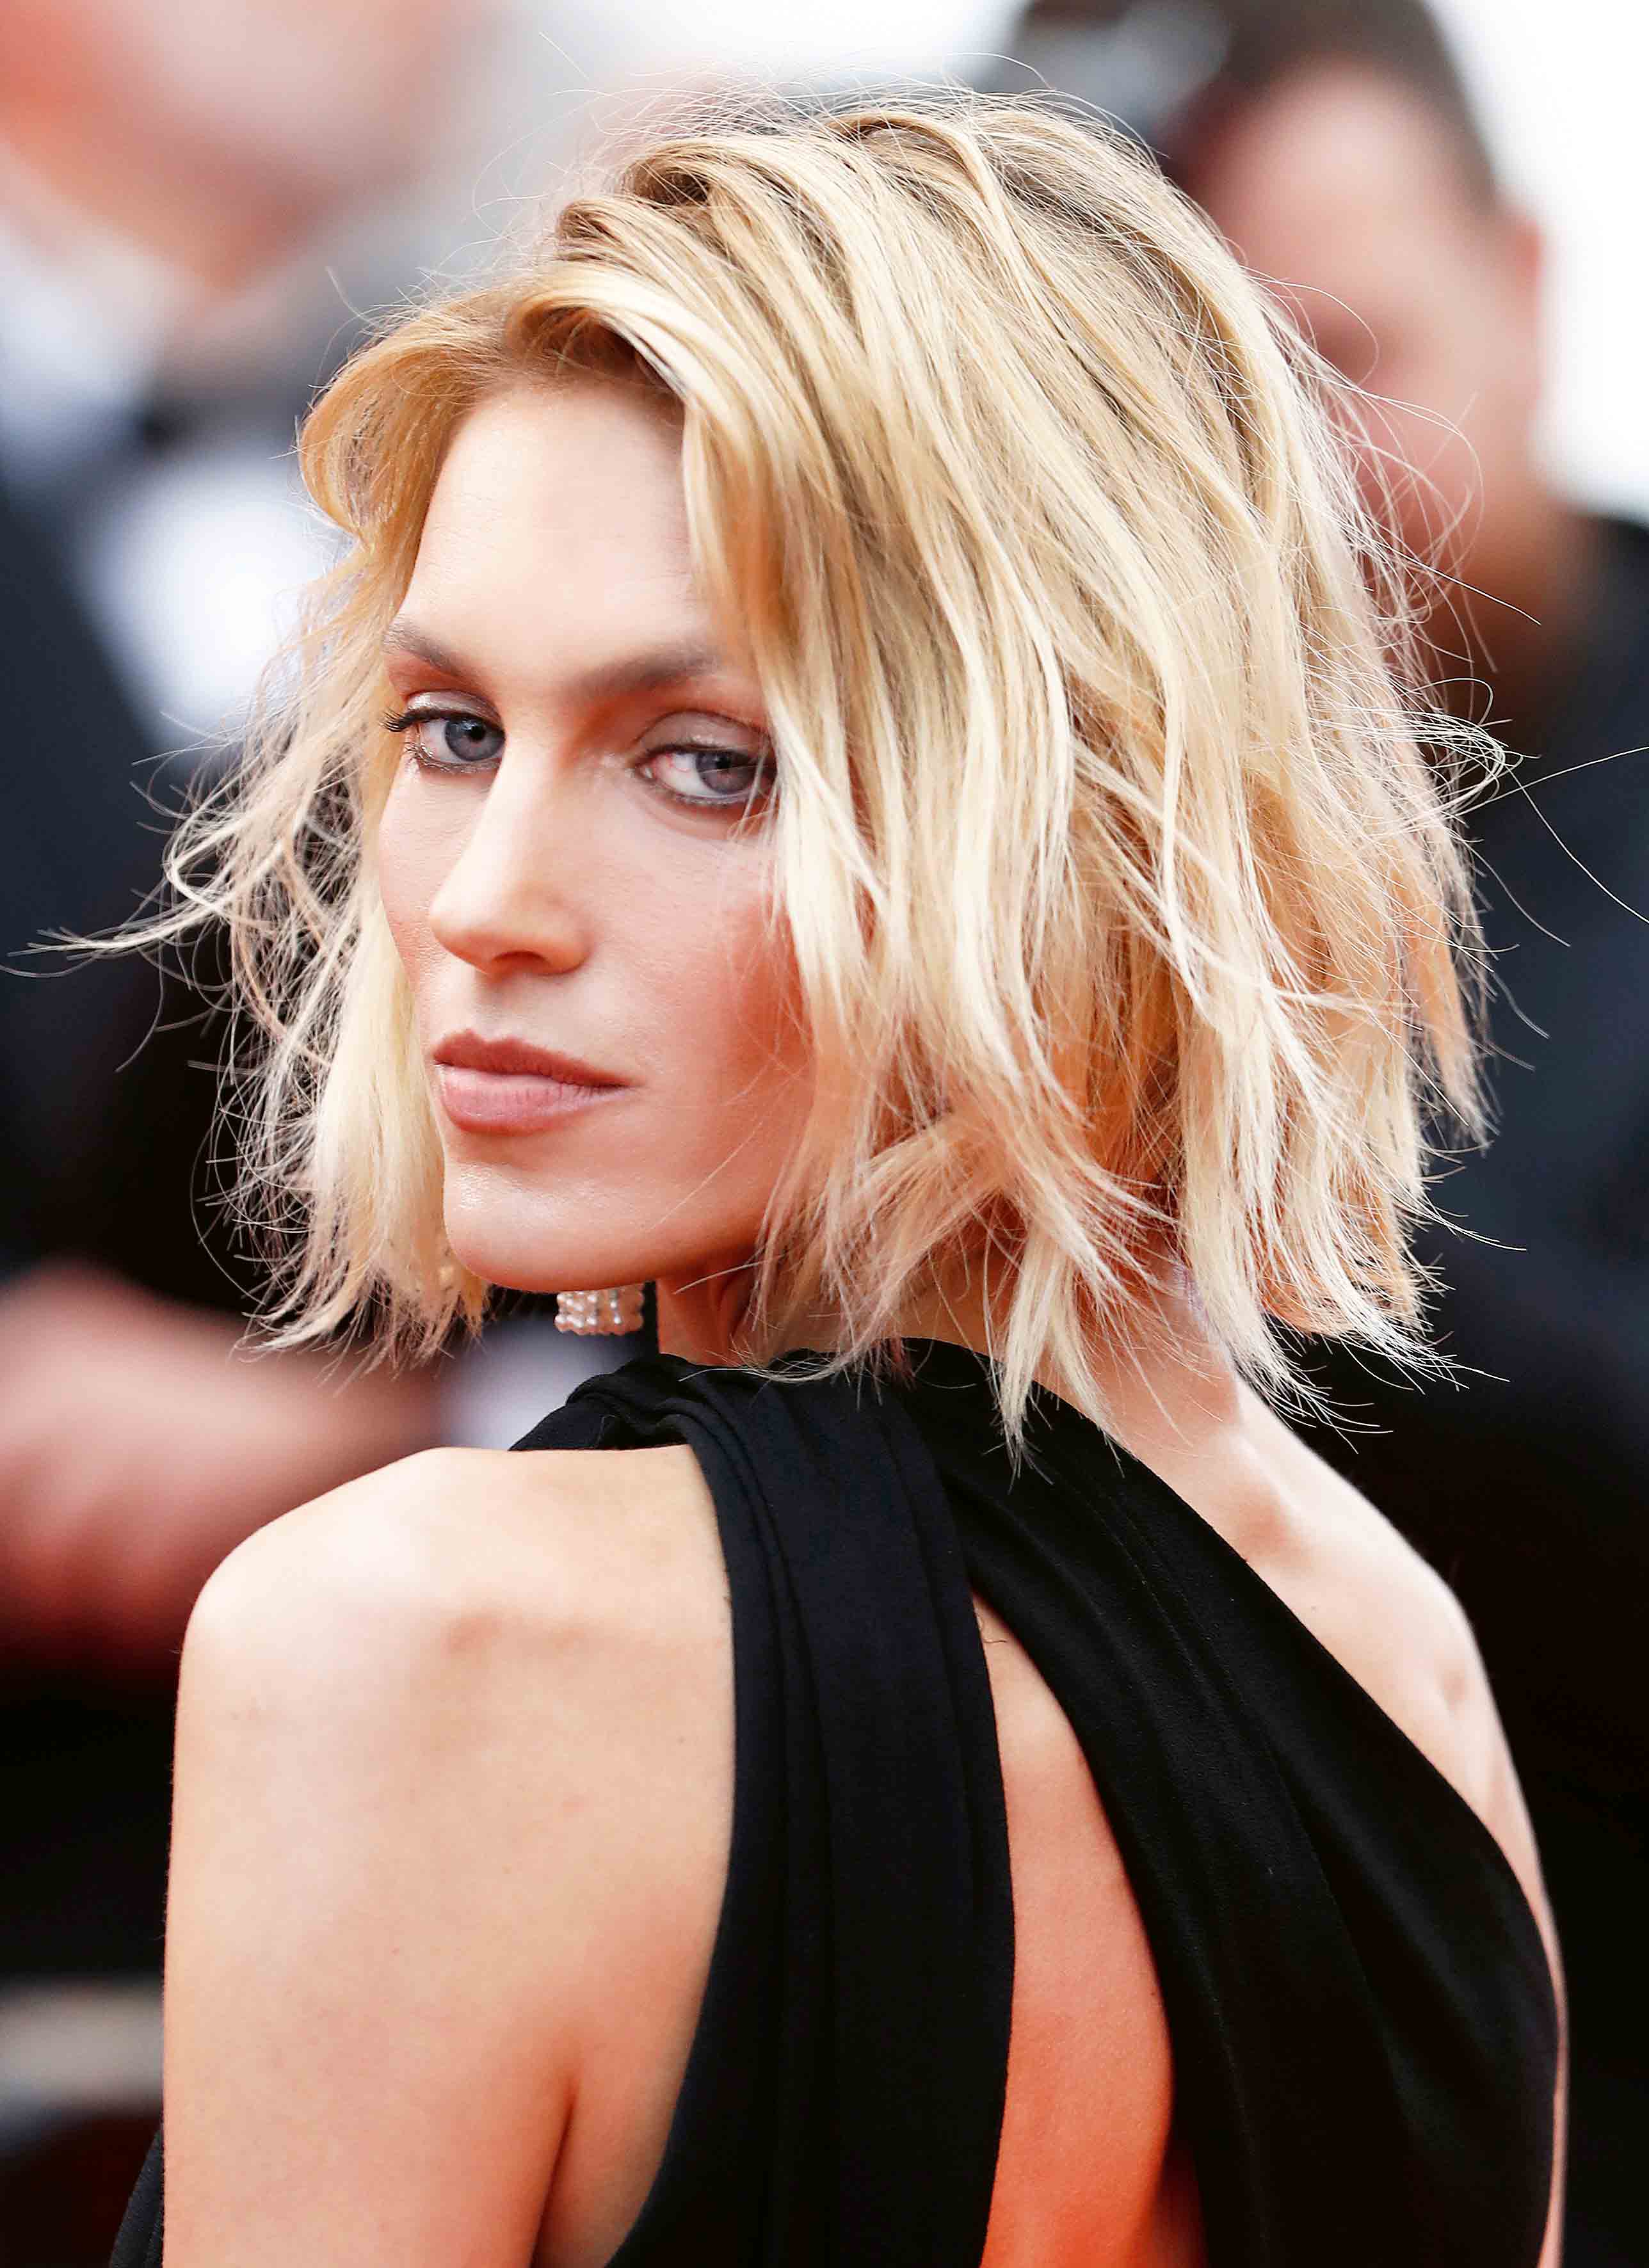 HAIR CARE HACKS FROM THE EXPERTS AND HAIR TRENDS OF THE YEAR